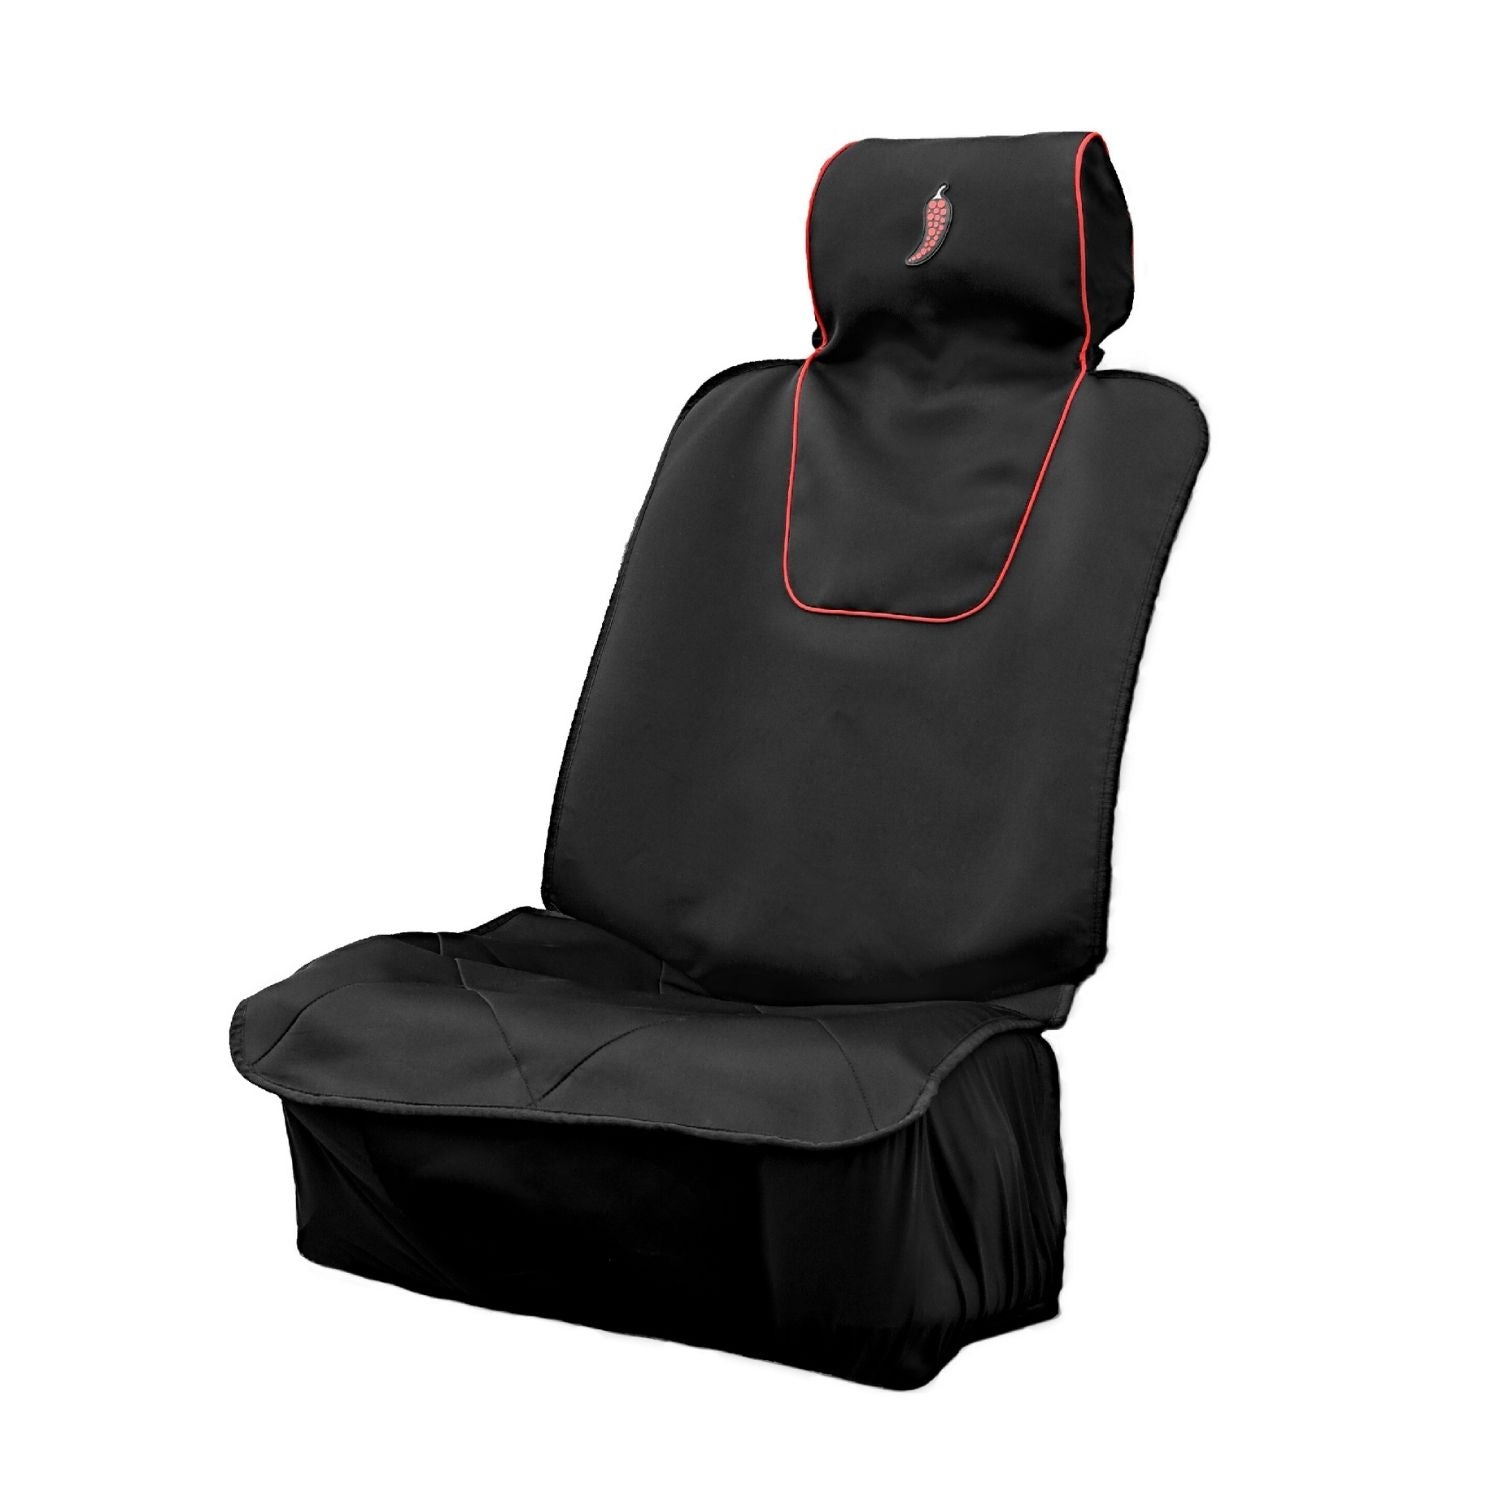 Car Seat Cover - Sweat-Proof, Universal Fit